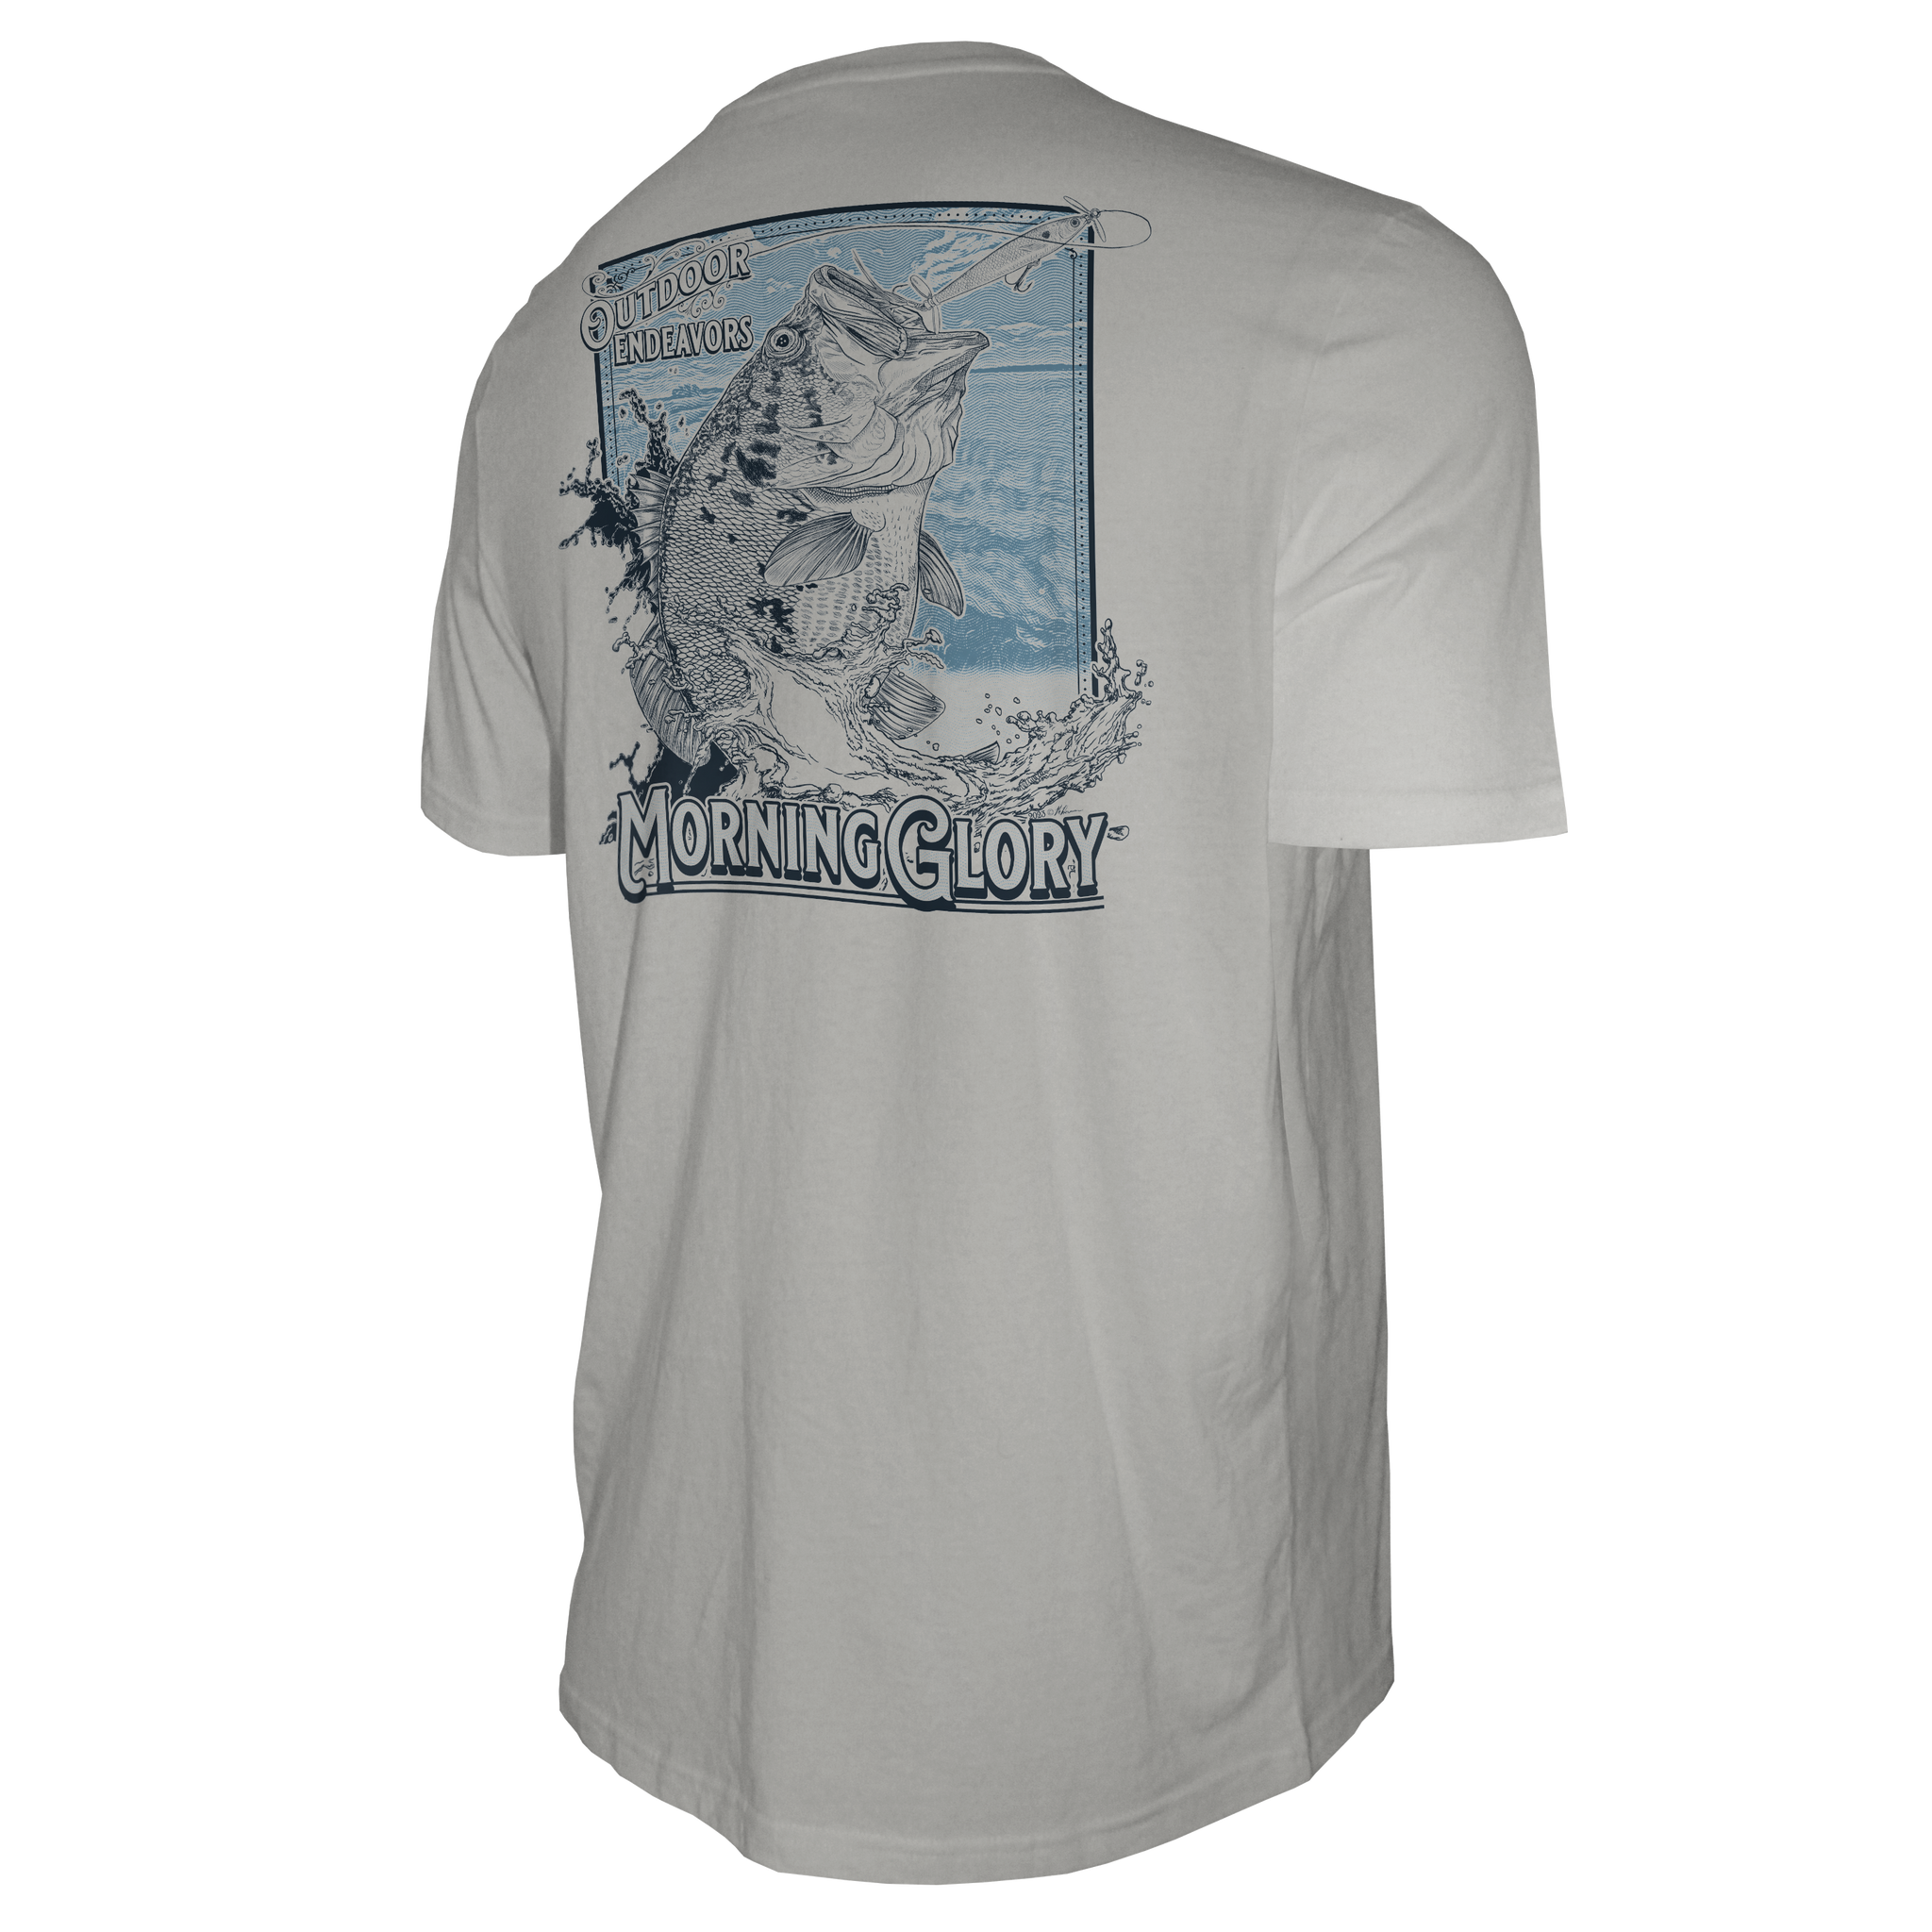 Outdoor Endeavors Classic - Short Sleeve Tee - Morning Glory